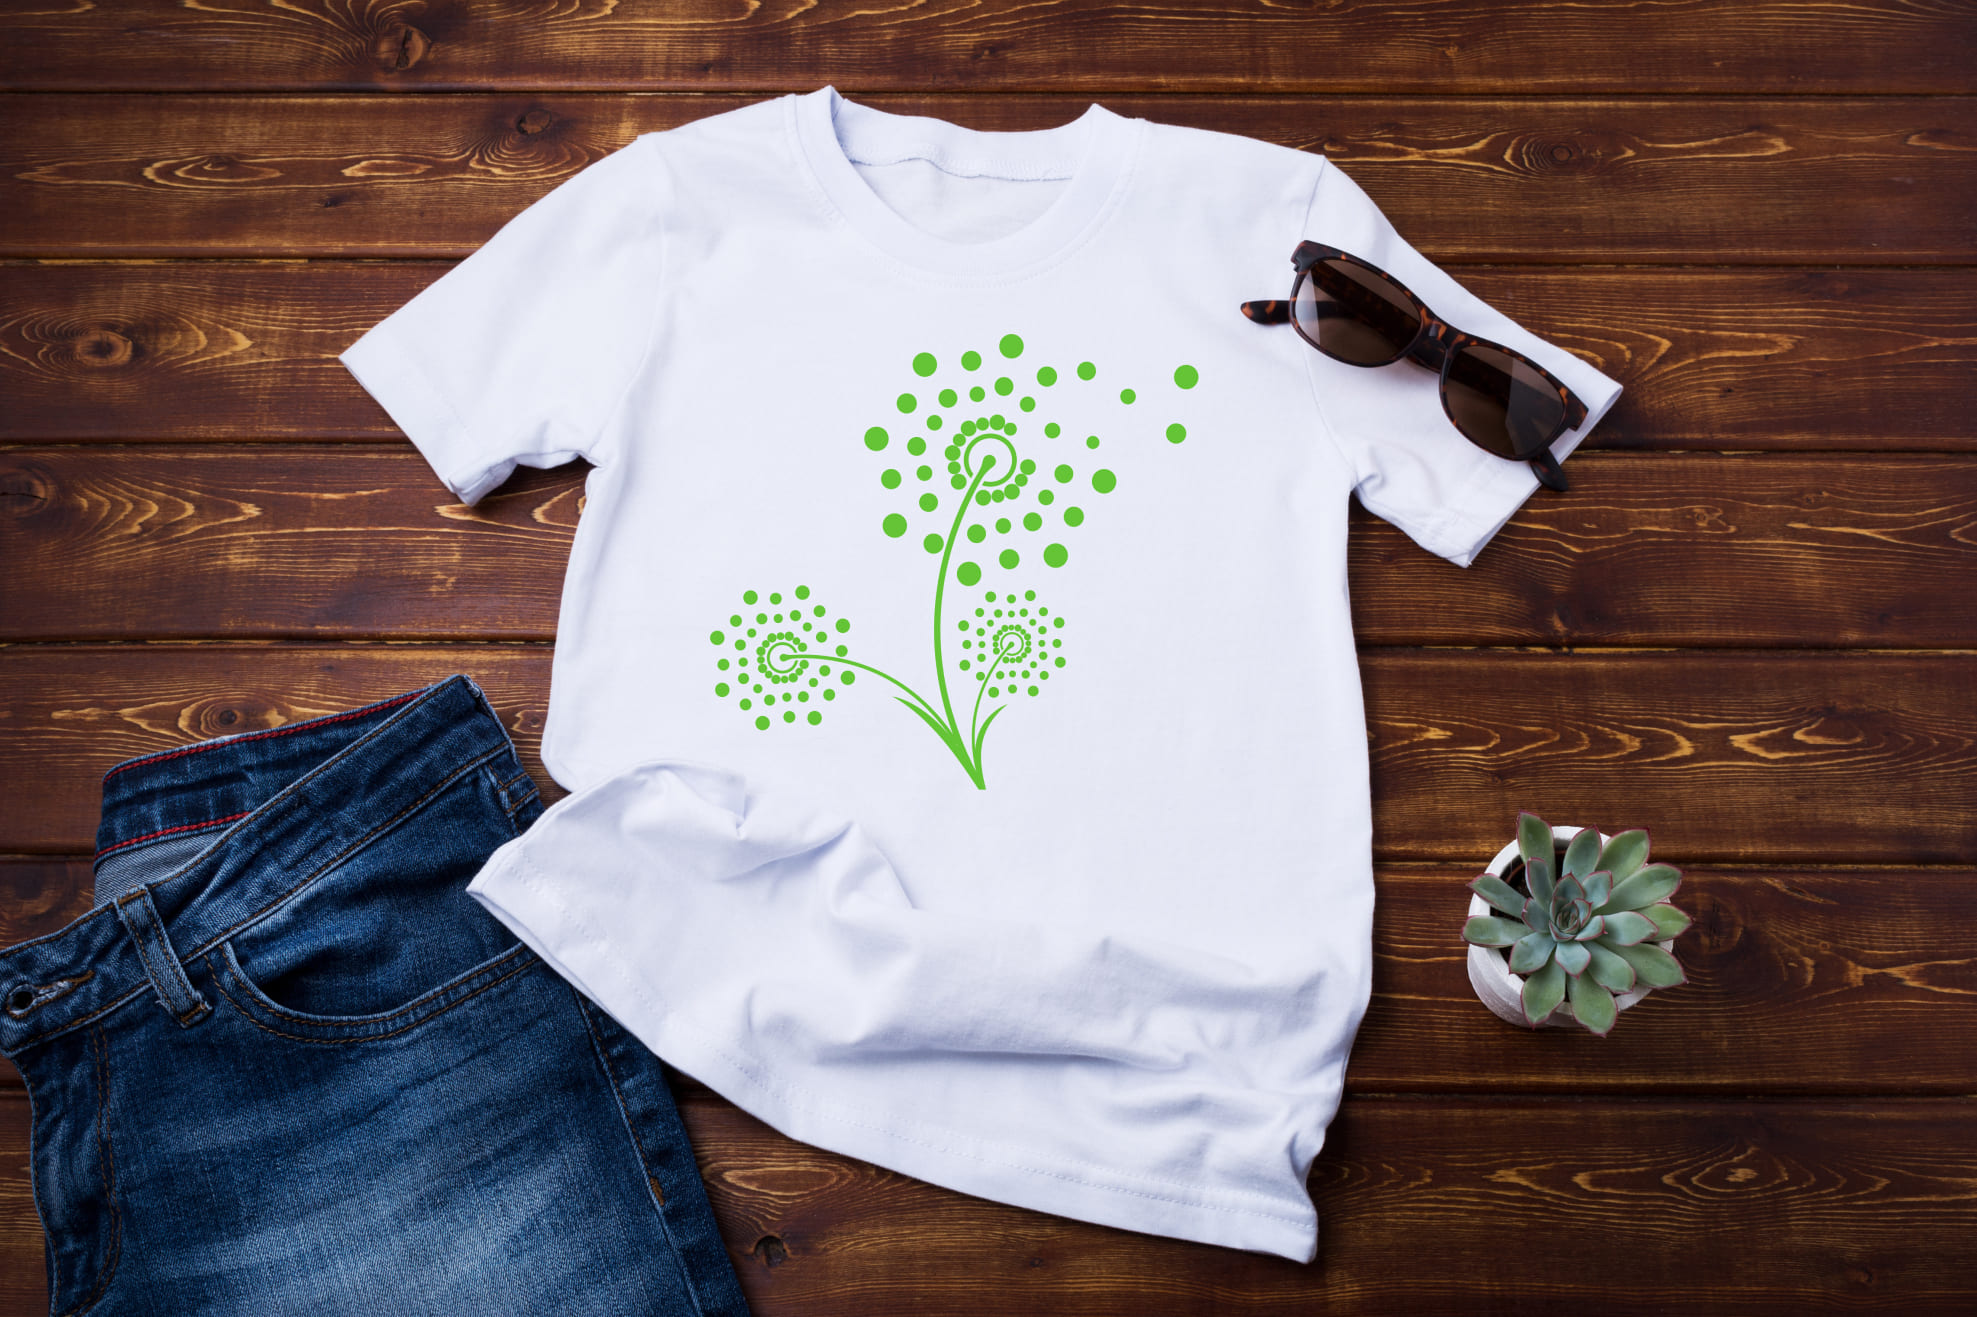 T-shirt image with exquisite green color dandelion print.